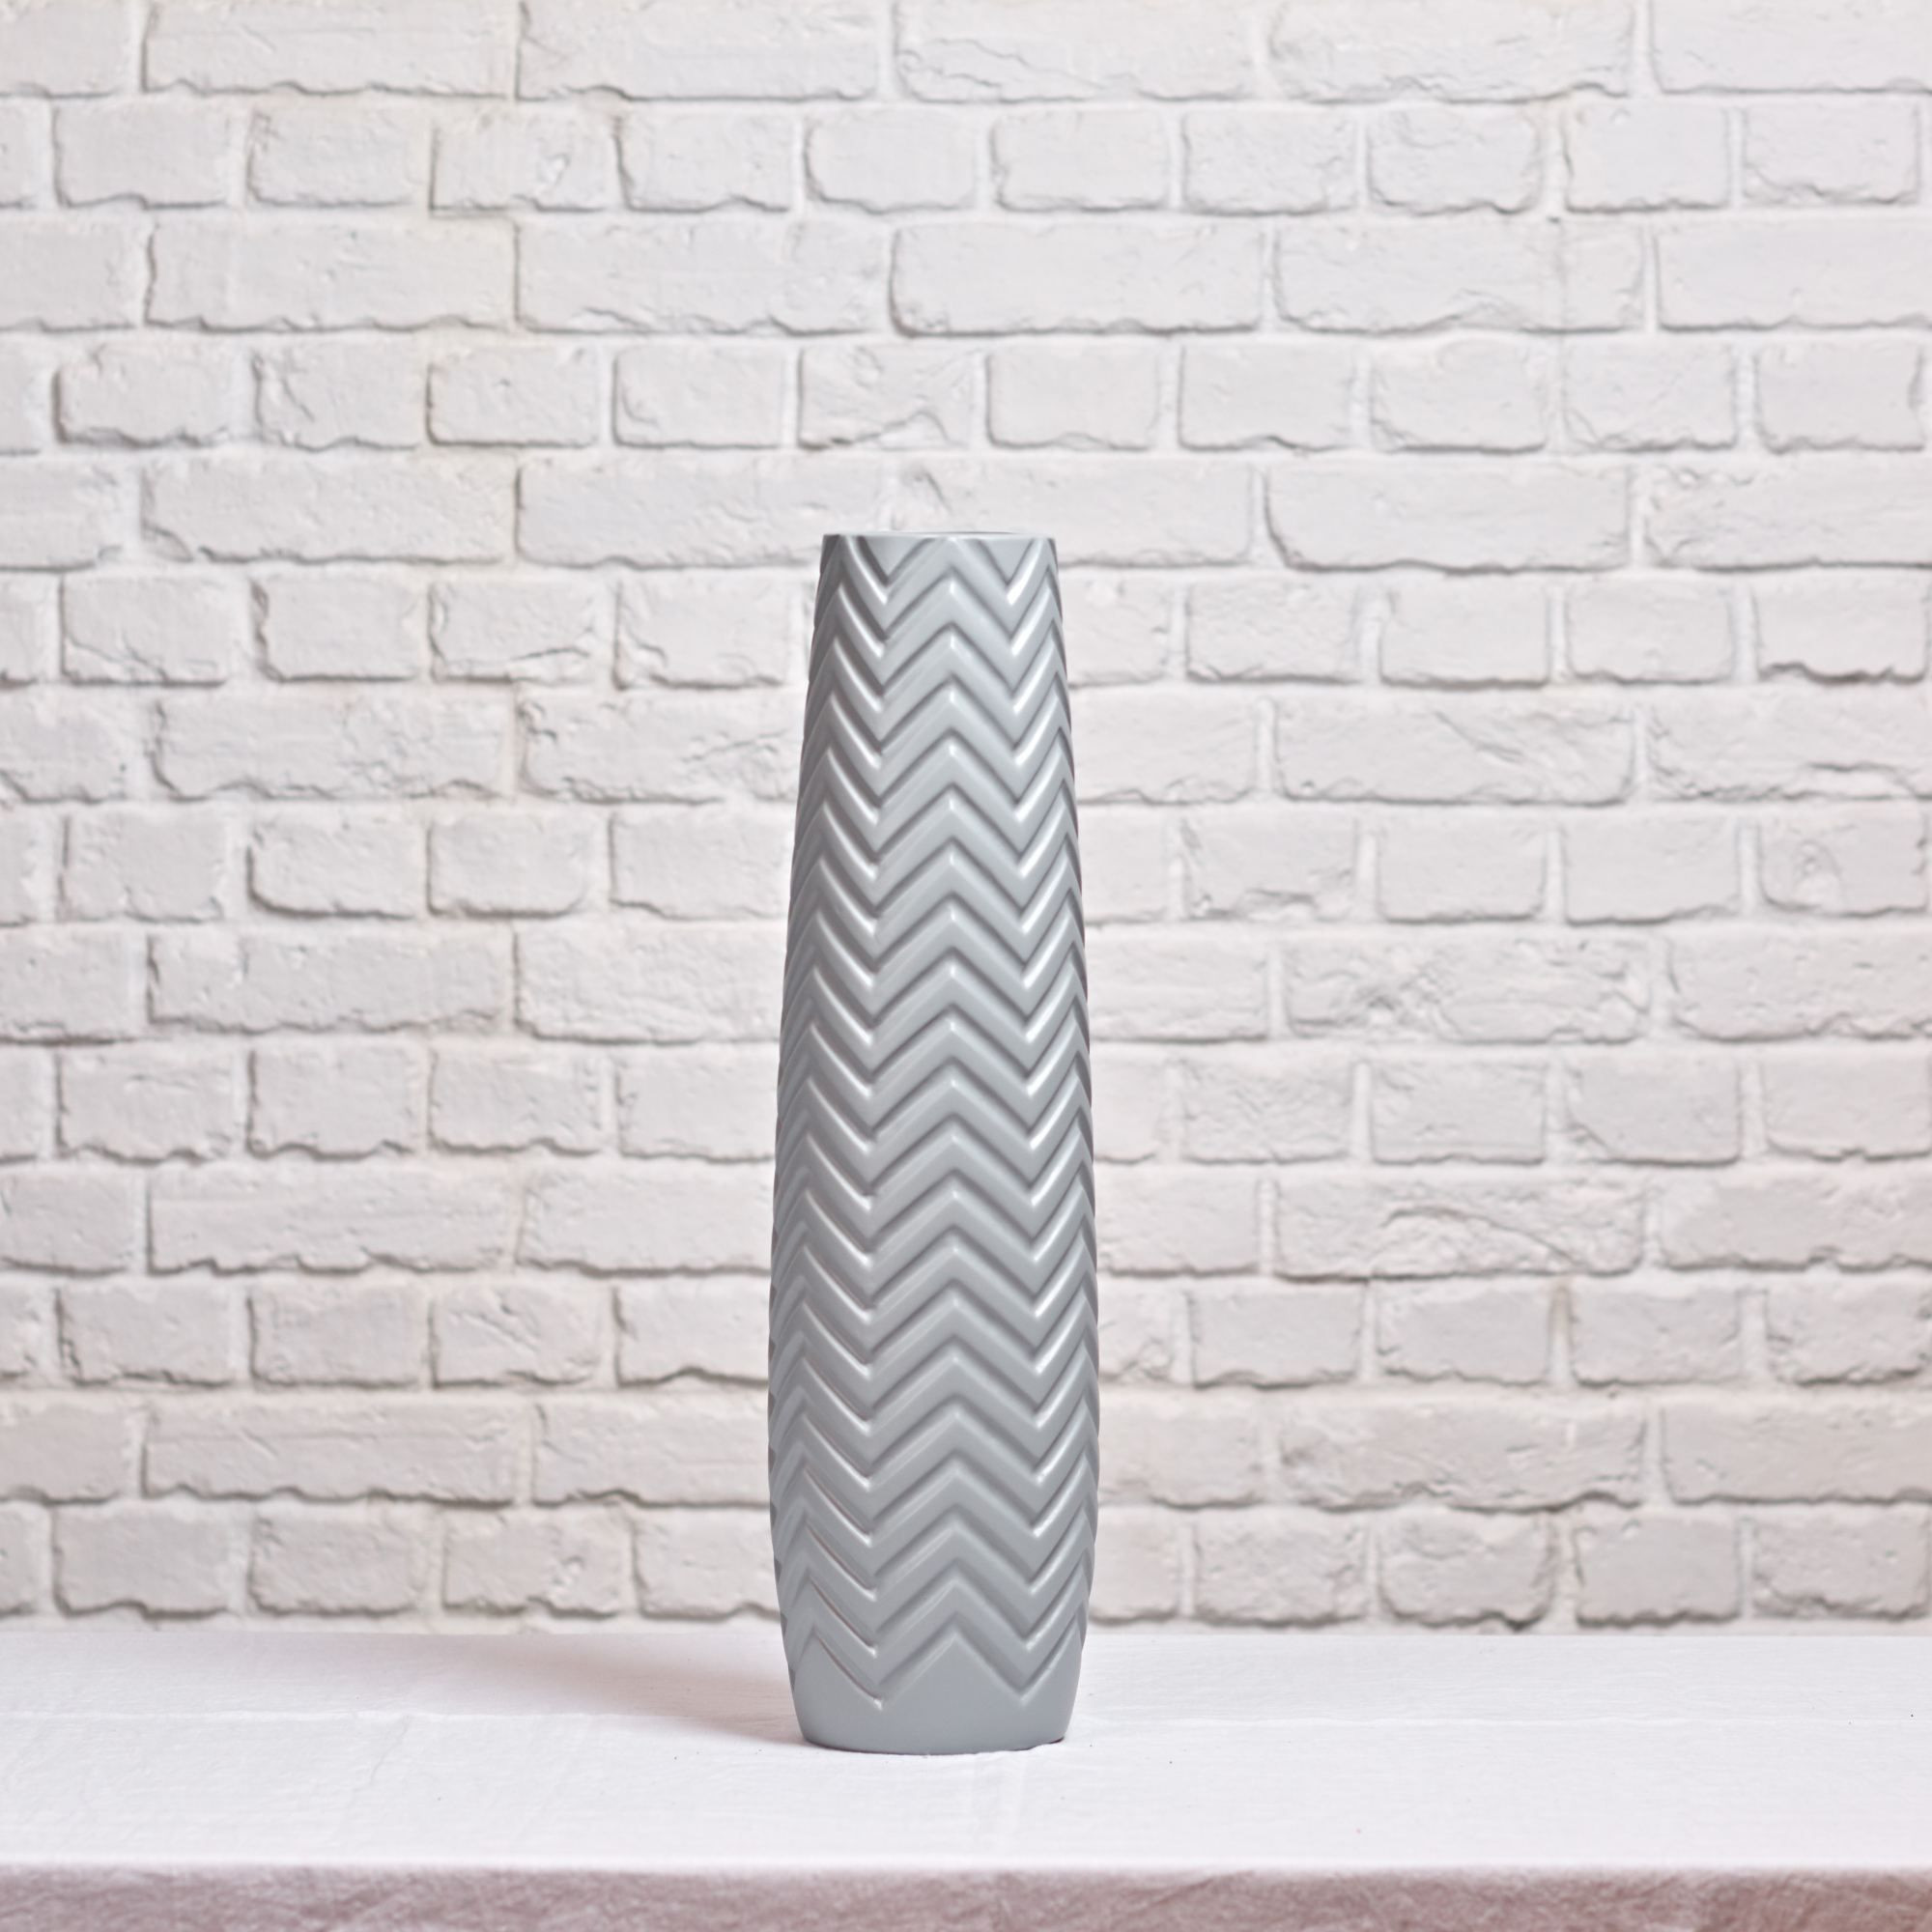 17 Stunning Grey Ceramic Vase 2024 free download grey ceramic vase of this is a small ceramic grey vase with a zig zag pattern with this is a small ceramic grey vase with a zig zag pattern surrounding the